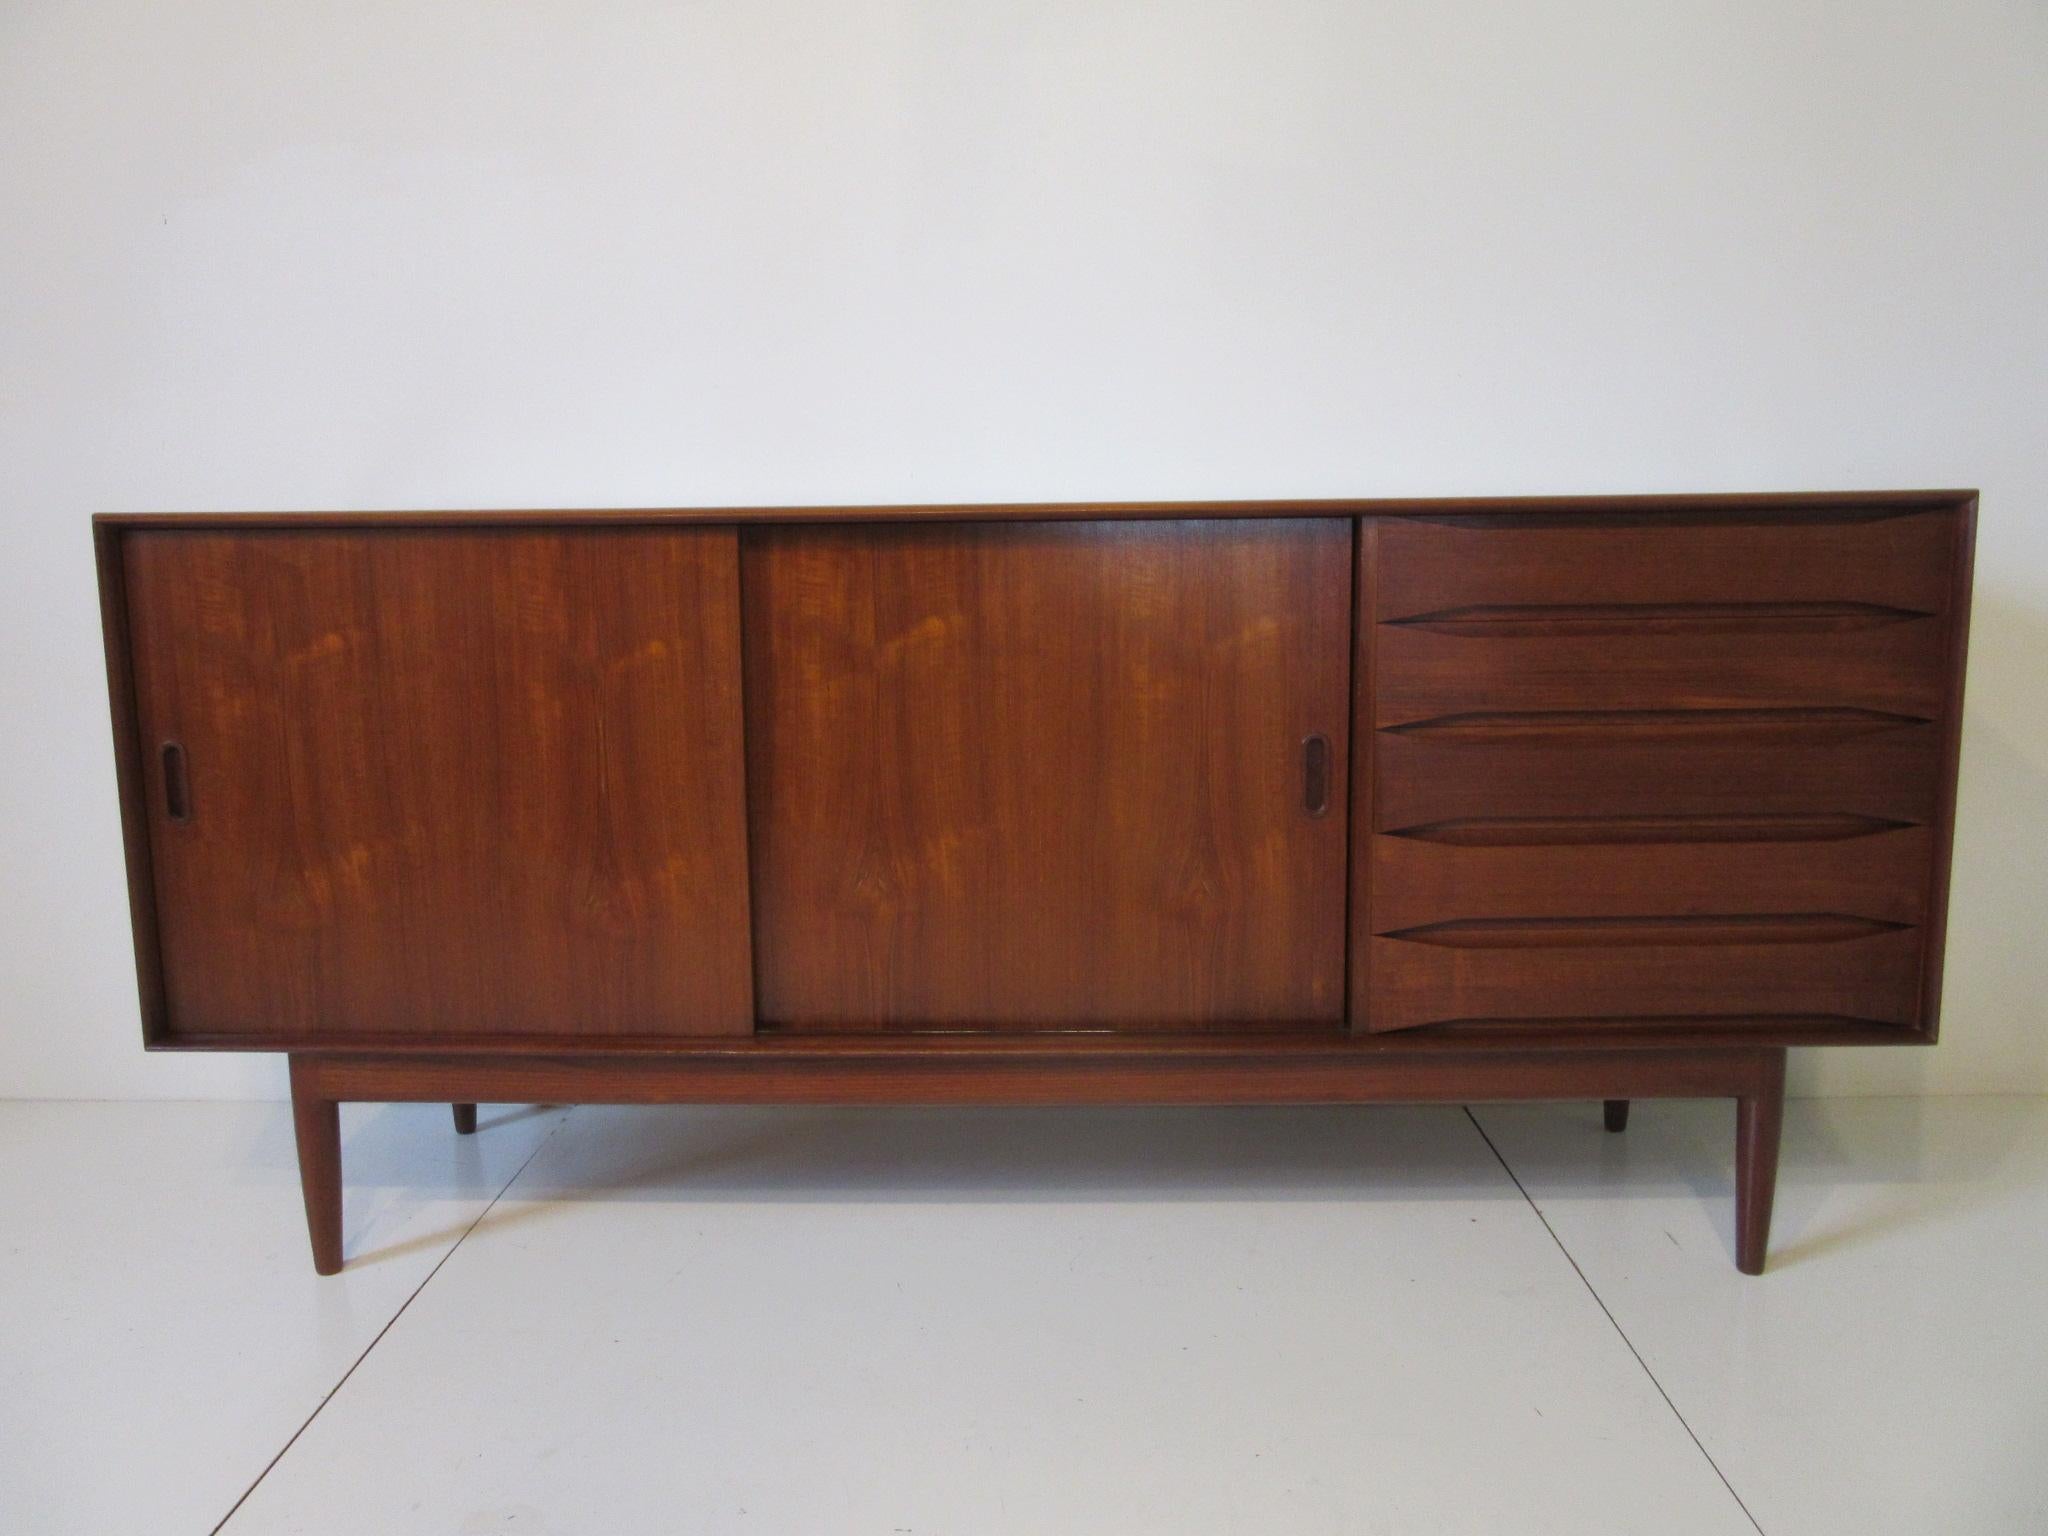 A beautifully crafted teak wood credenza with two bookmatched sliding doors, adjustable shelves and five drawers, two divided with tapering open front areas that serve as pulls. This credenza has a finished backside screwed together with small brass